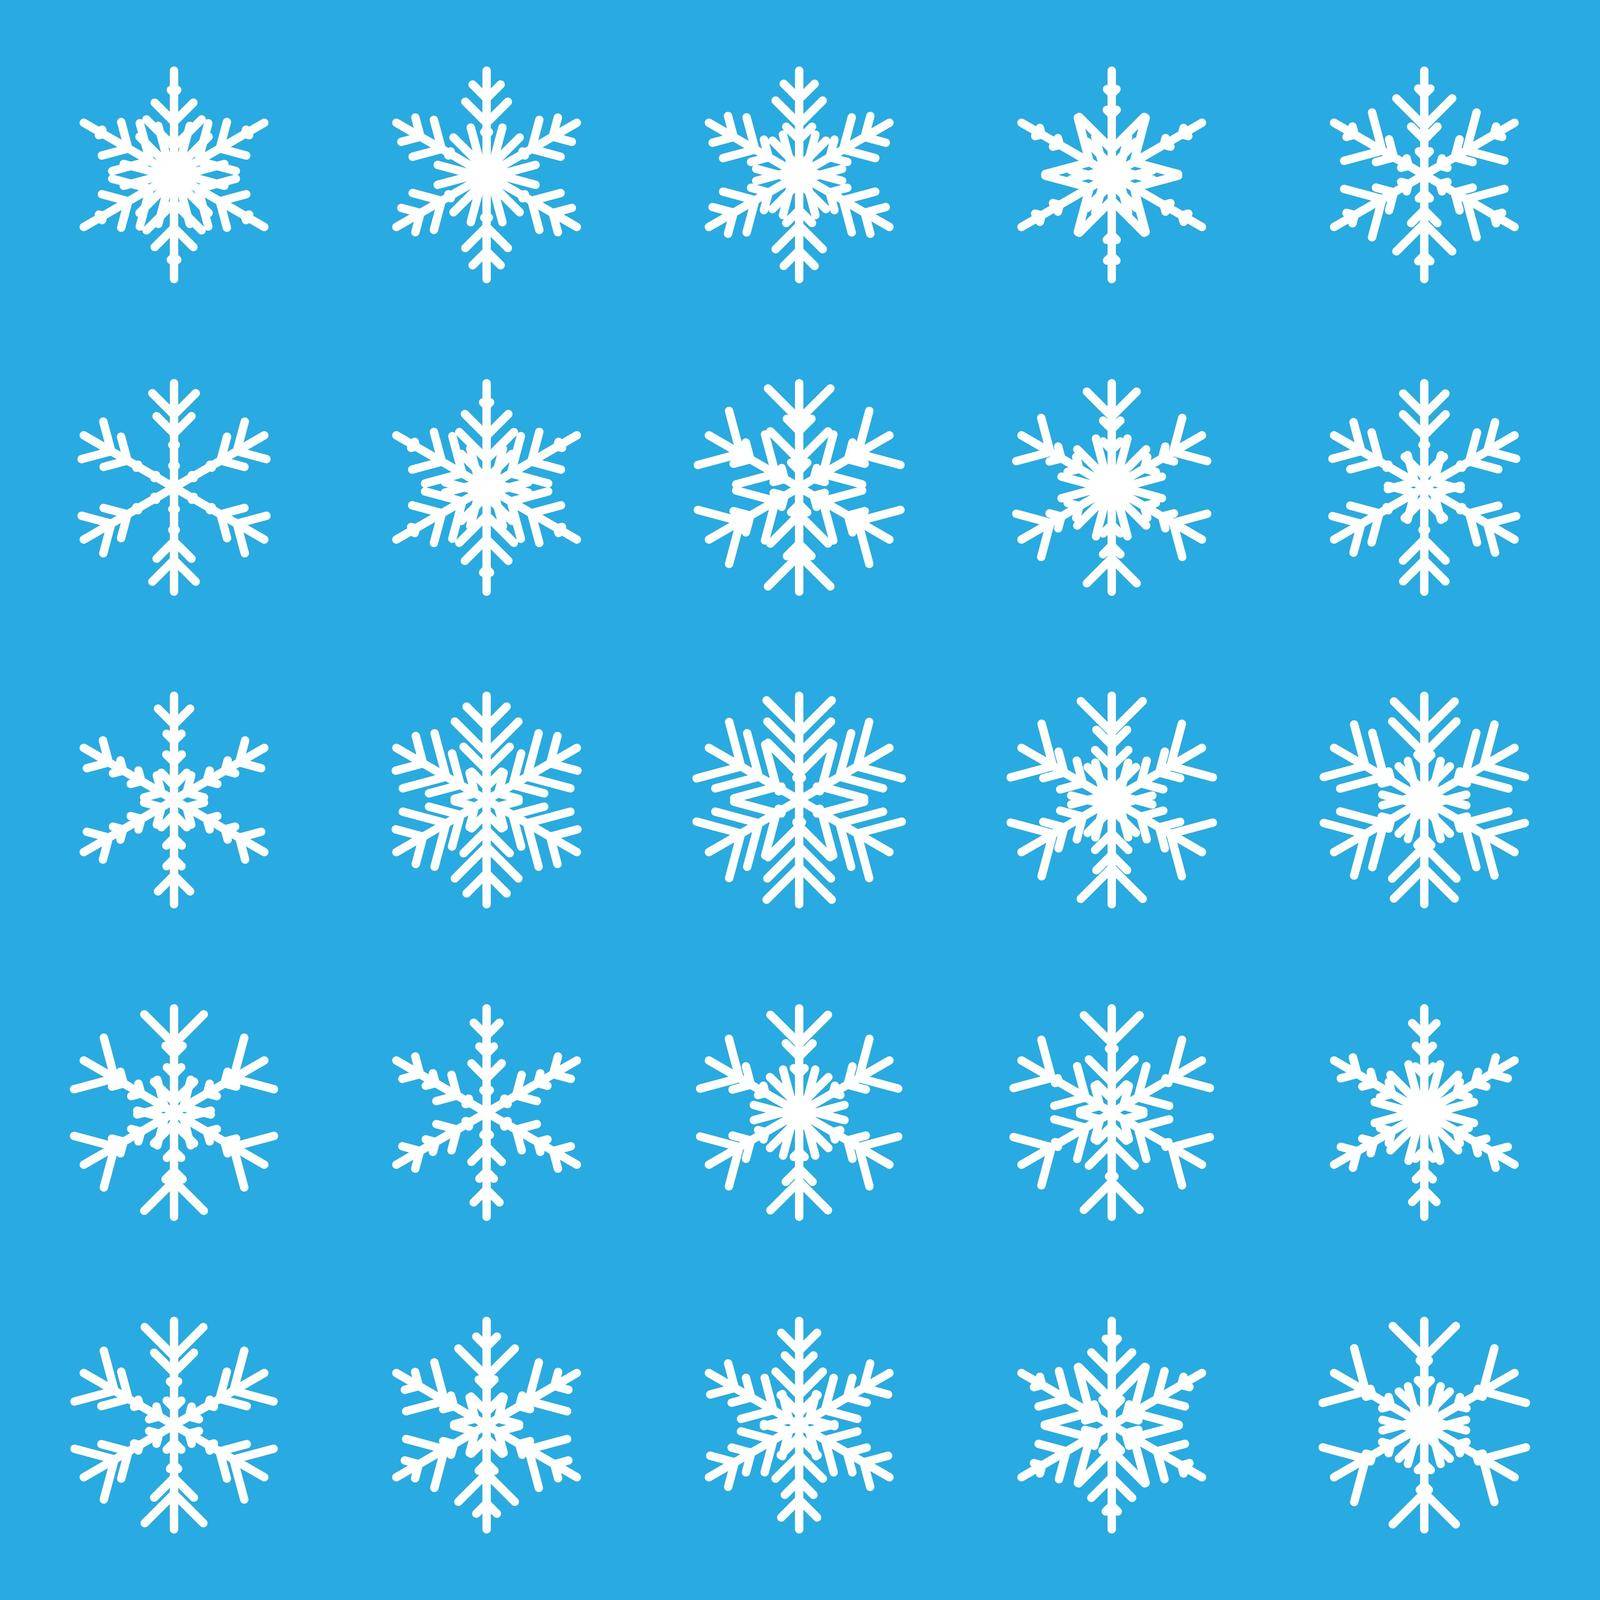 Snowflake set icon in flat style. Snow flake winter vector illustration on isolated background. Christmas snowfall snowflakes ornament collection business concept. by LysenkoA